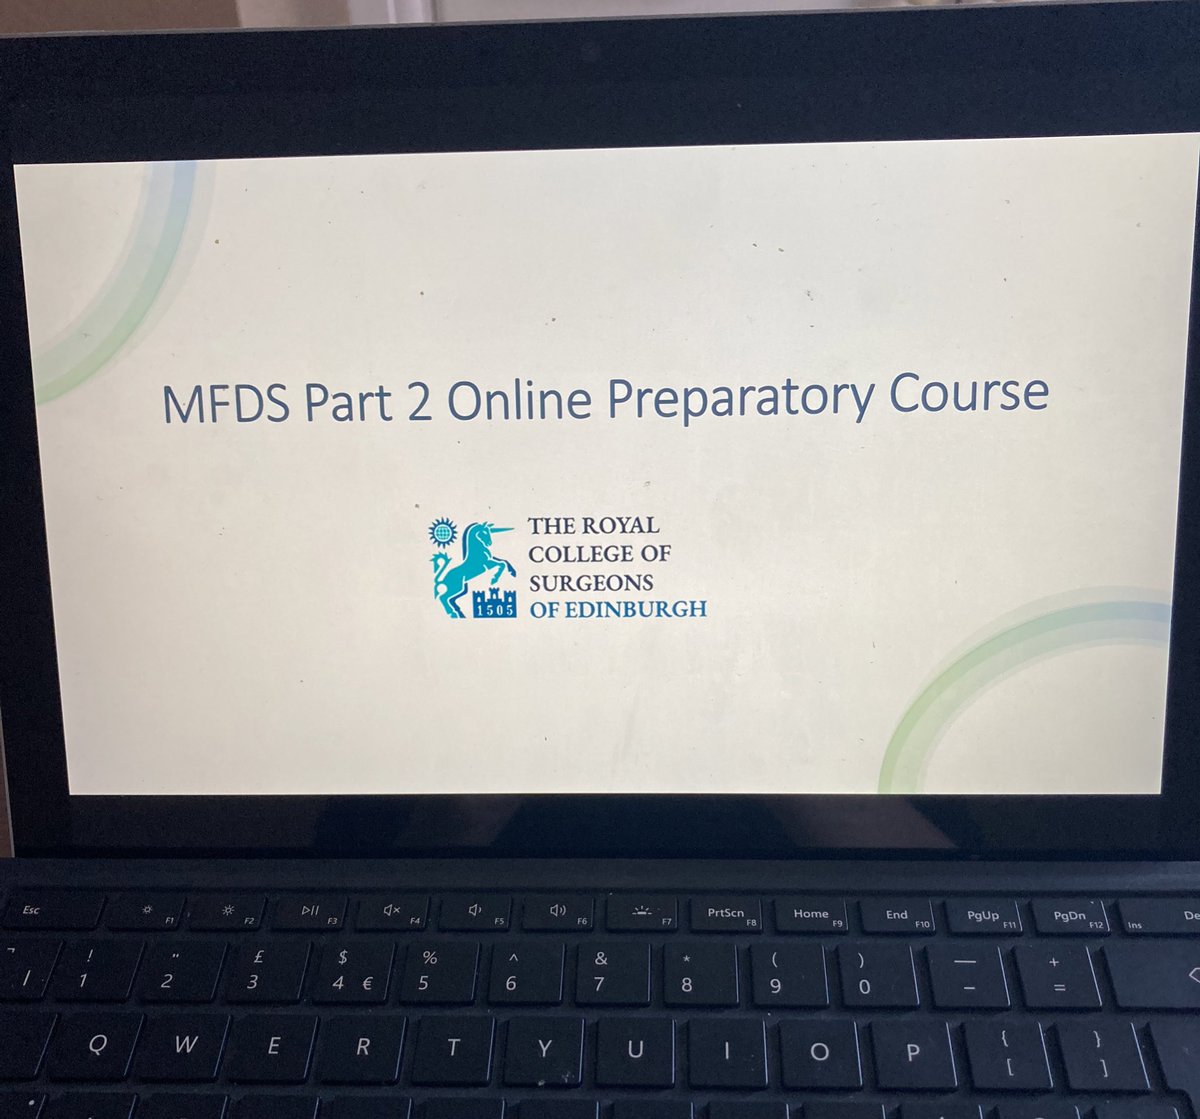 Lovely day delivering the first online MFDS Part 2 Preparatory Course for @RCSEd today. A really engaged and interactive group of dentists